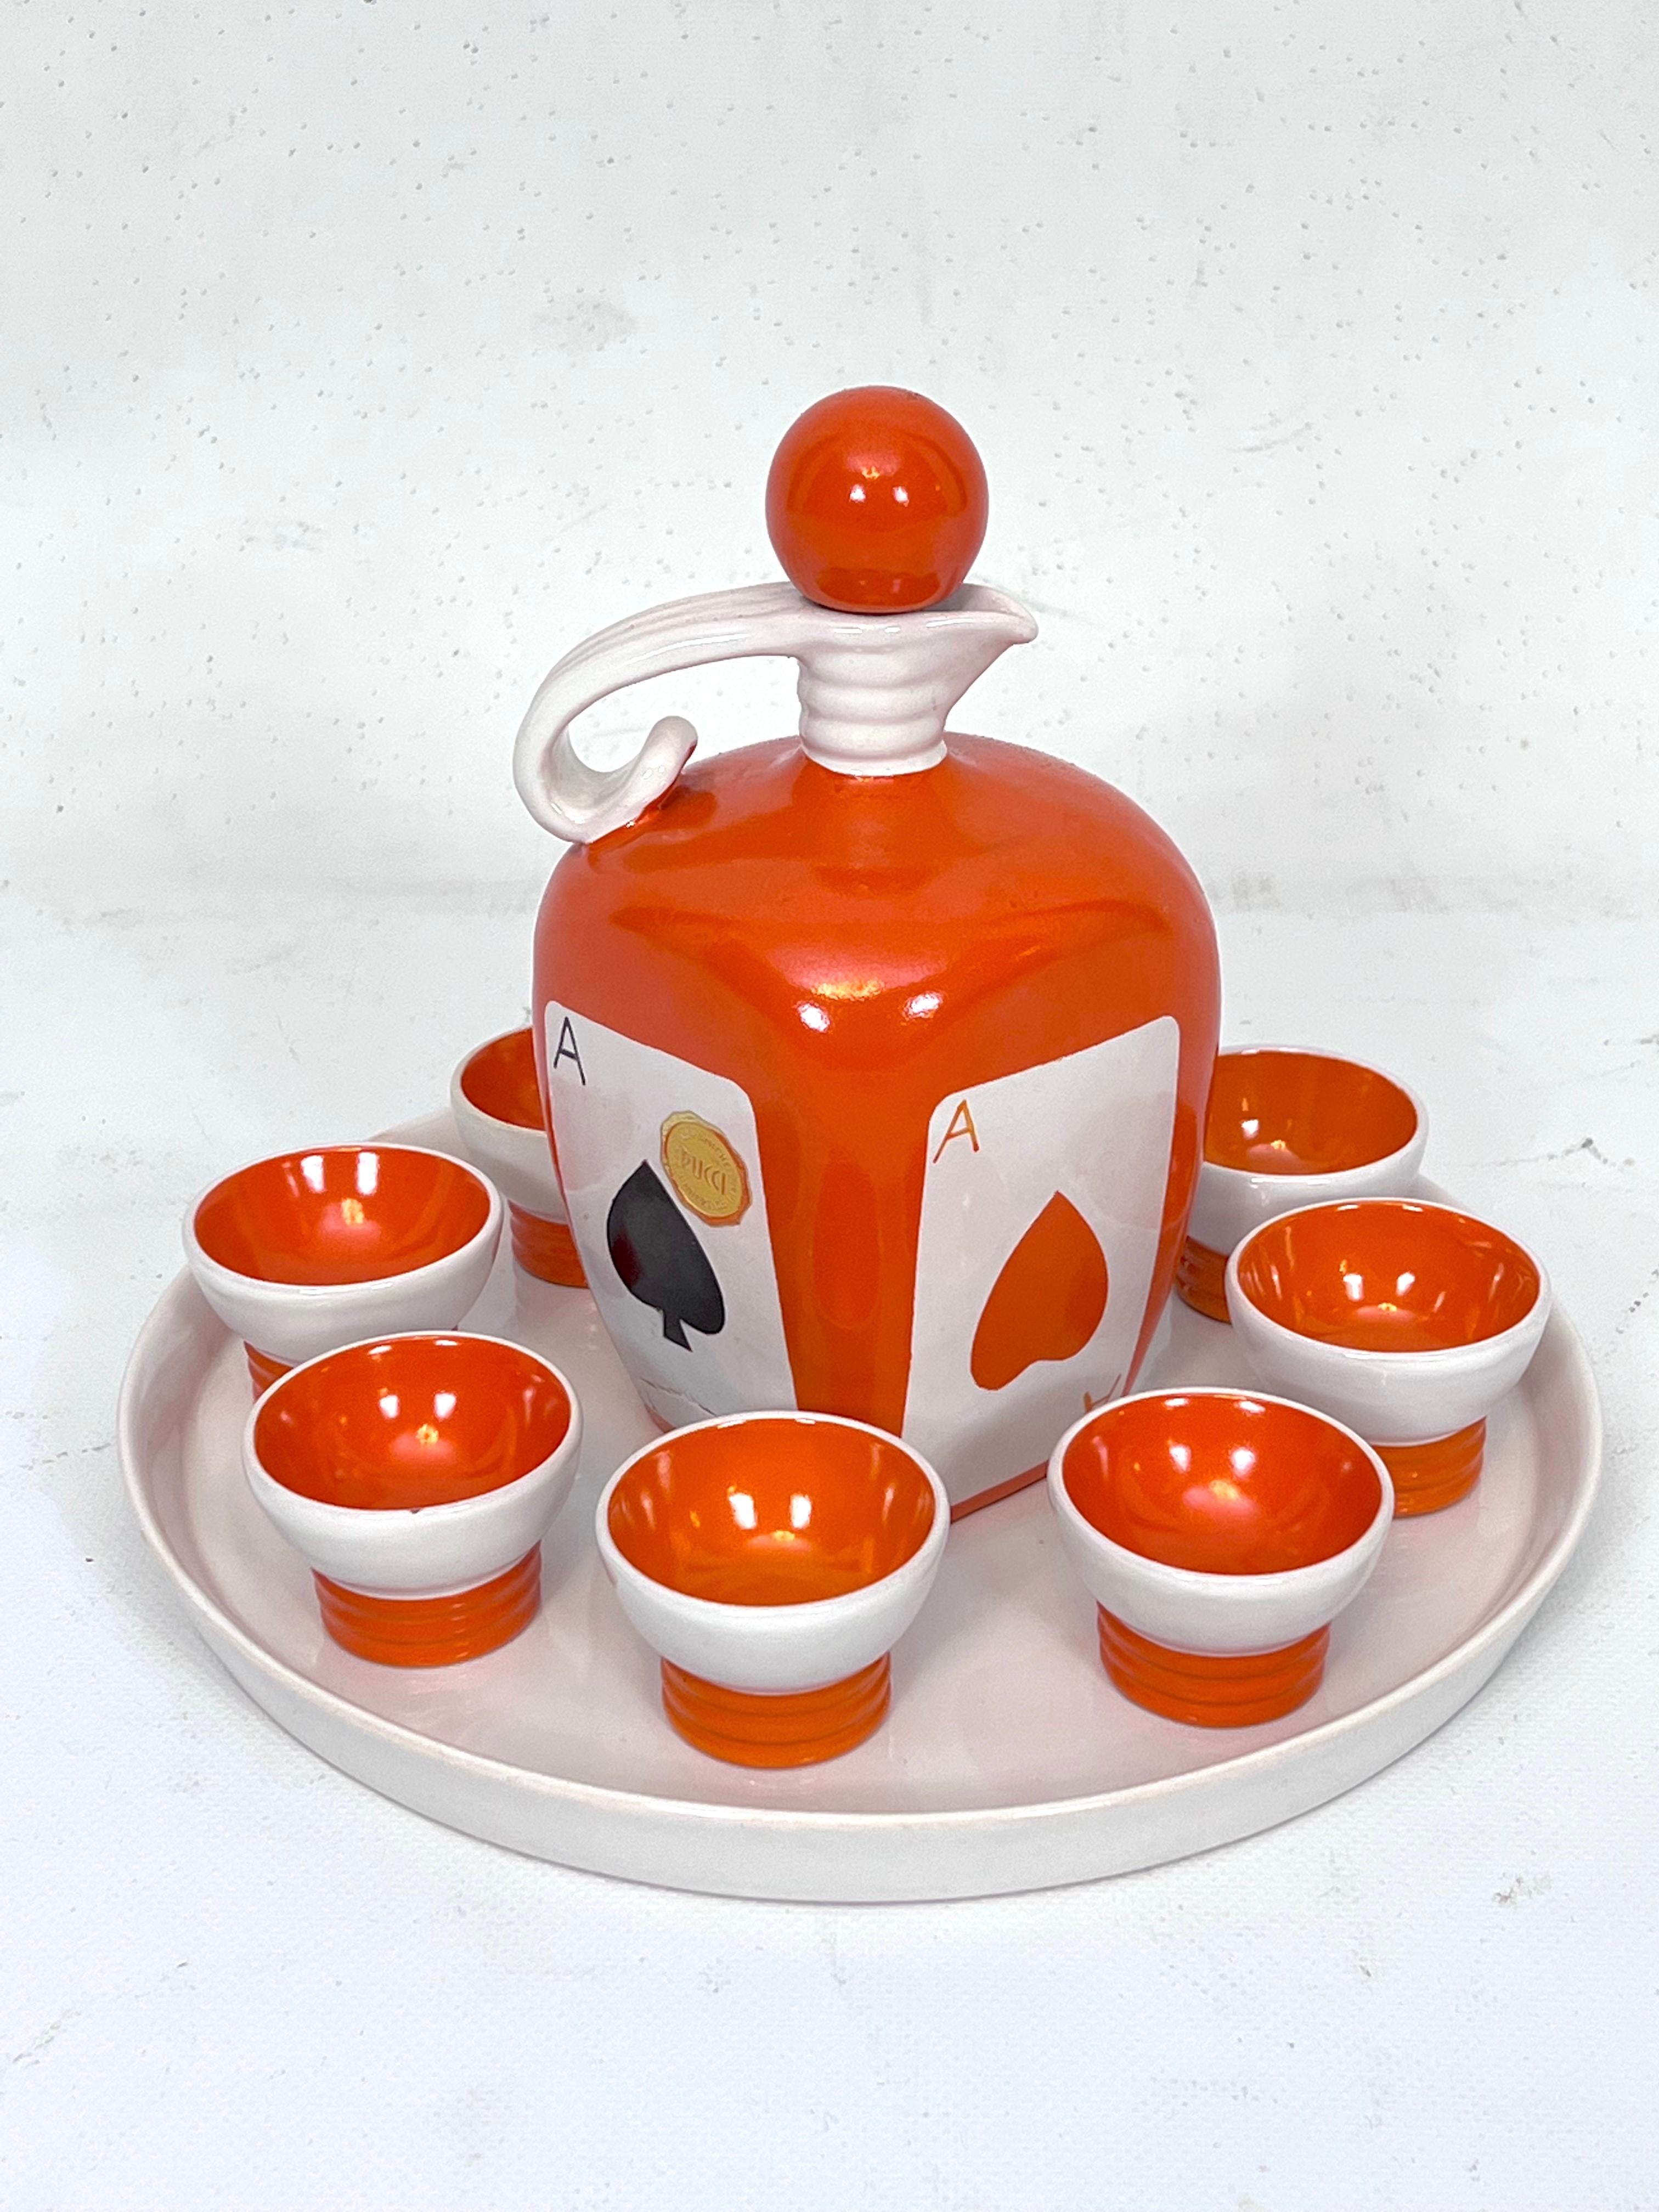 Good vintage condition with normal trace of age and use for this ceramic liquor set produced in Italy by Pucci Umbertide during the 50s. The set consists of a serving plate, a decanter and eight drinking cups.
 